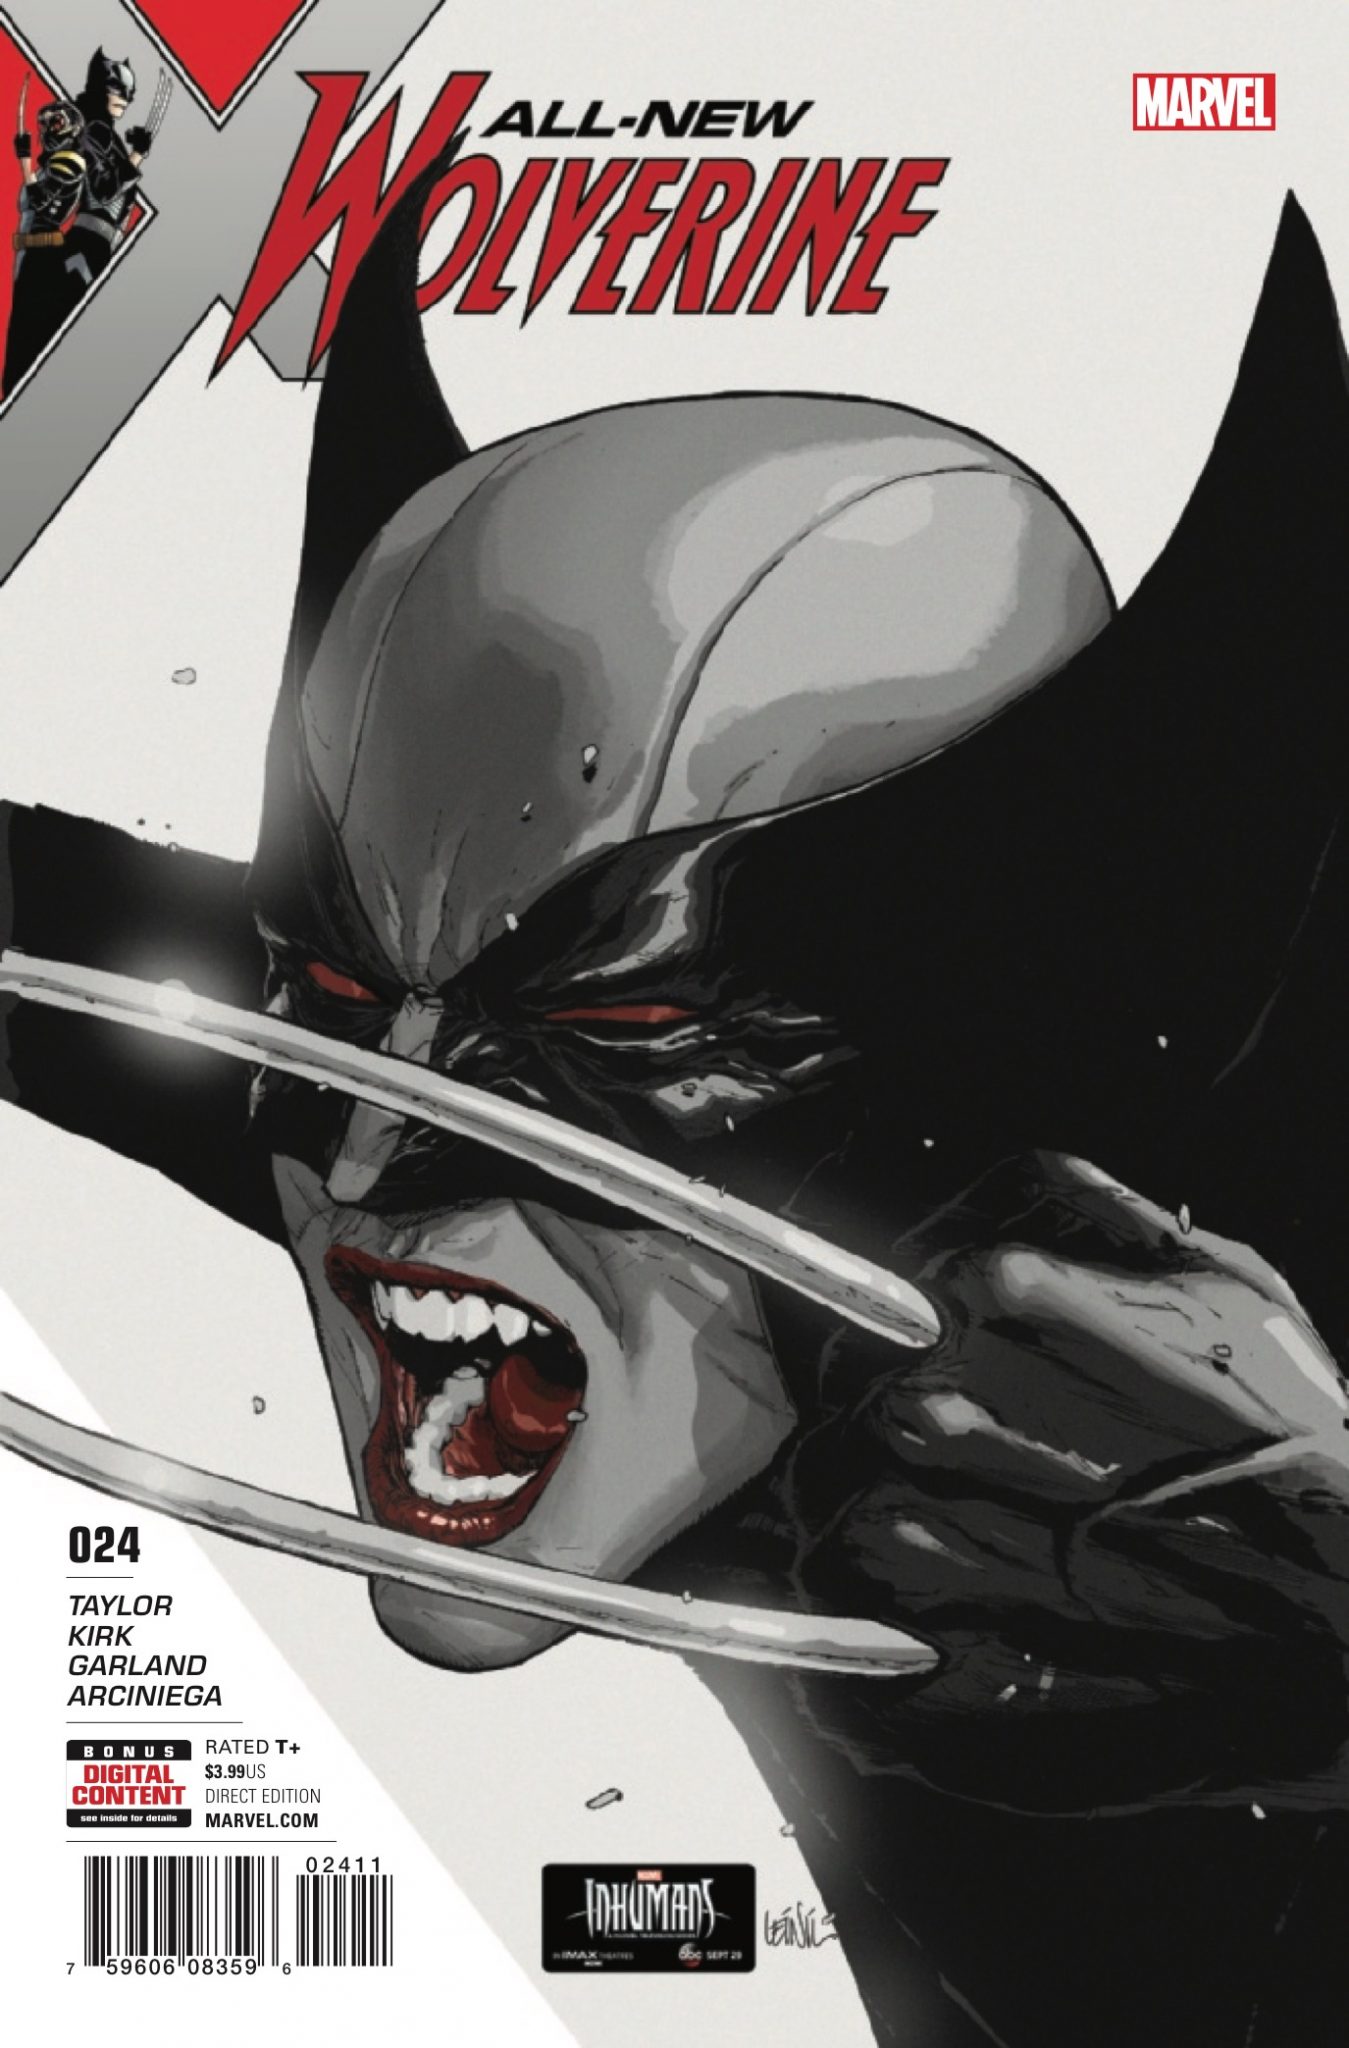 Marvel Preview: All-New Wolverine #24